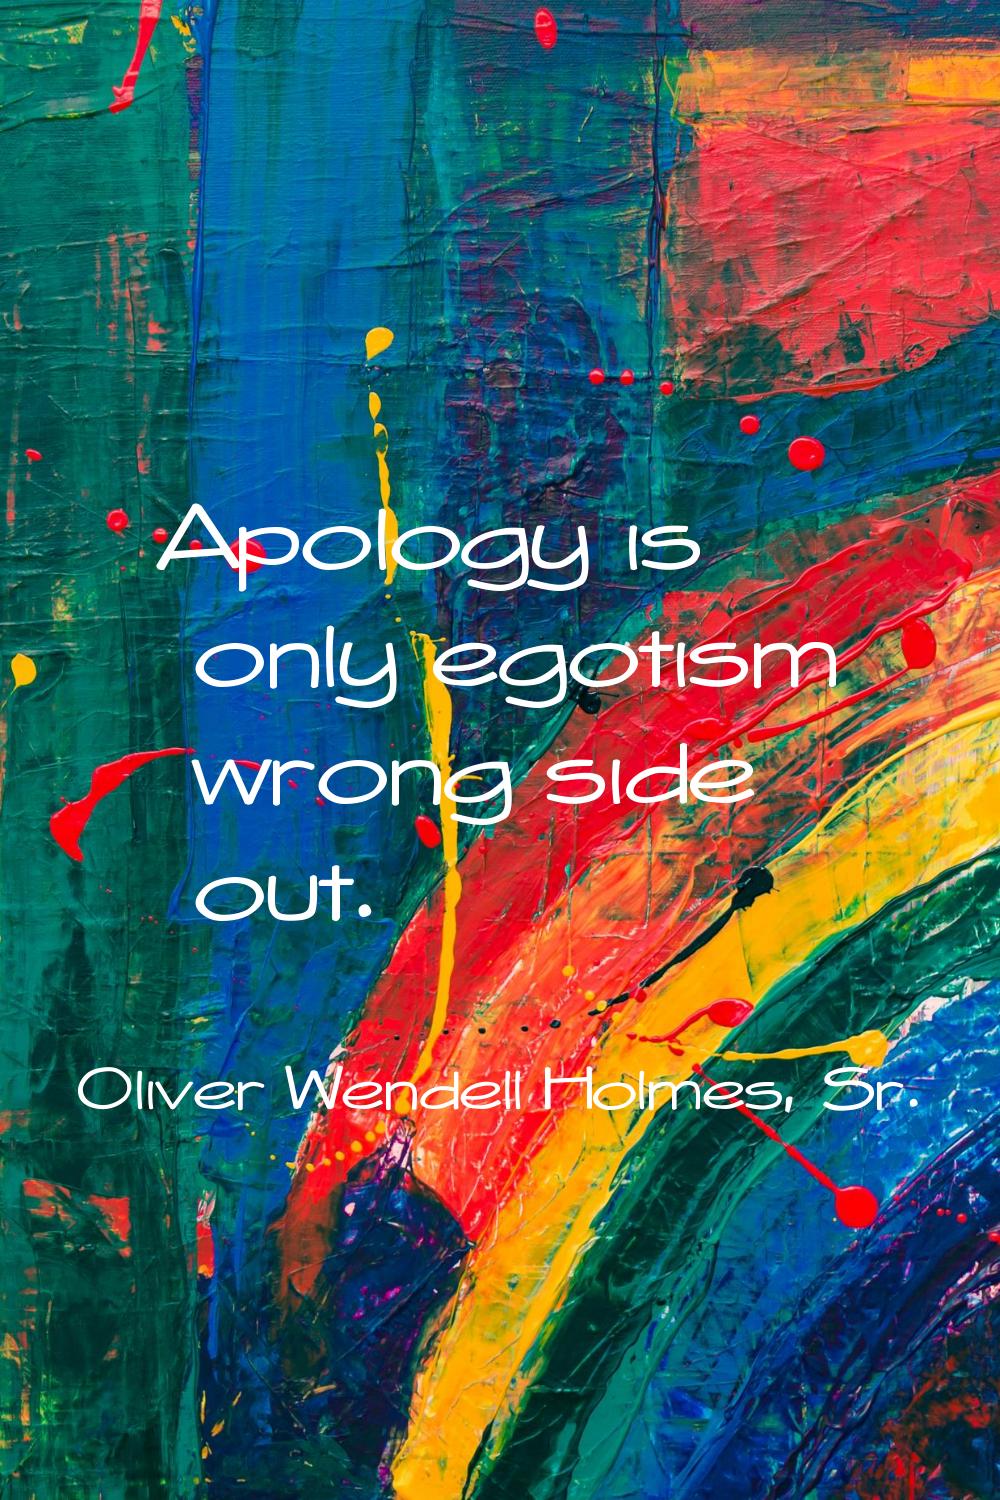 Apology is only egotism wrong side out.